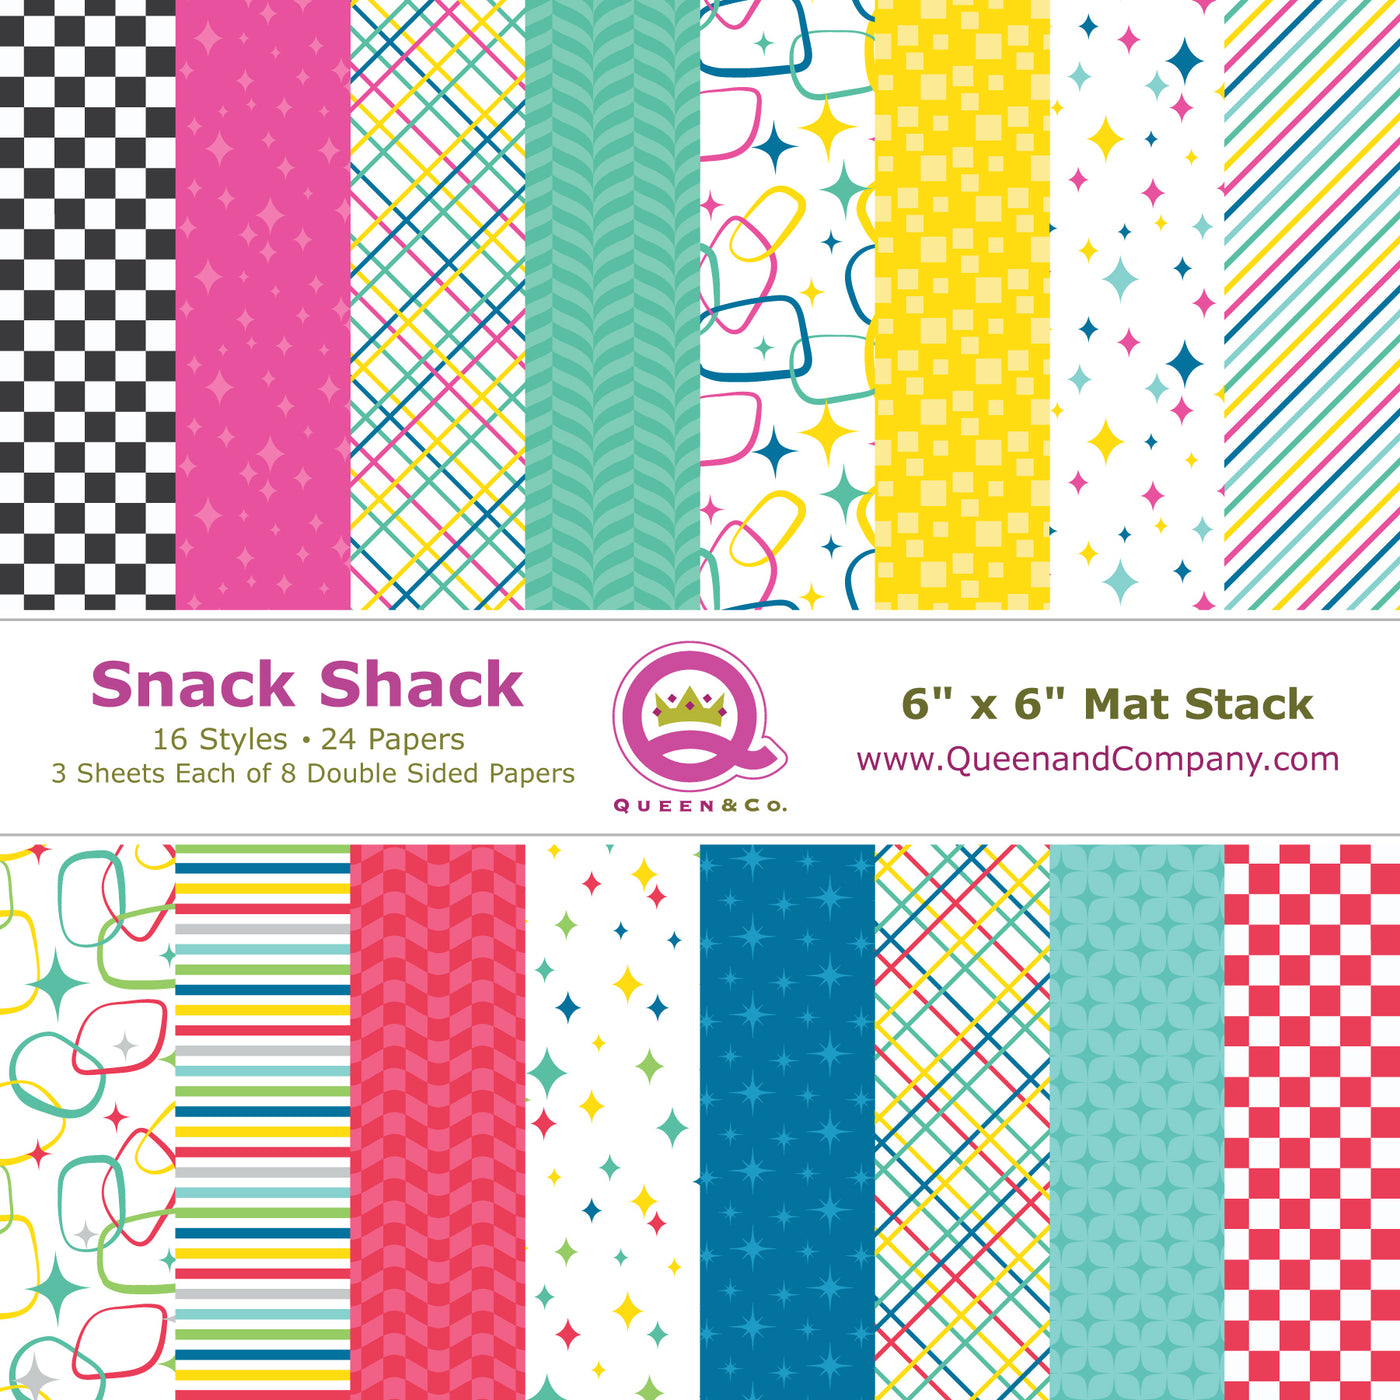 Snack Shack Paper Pad